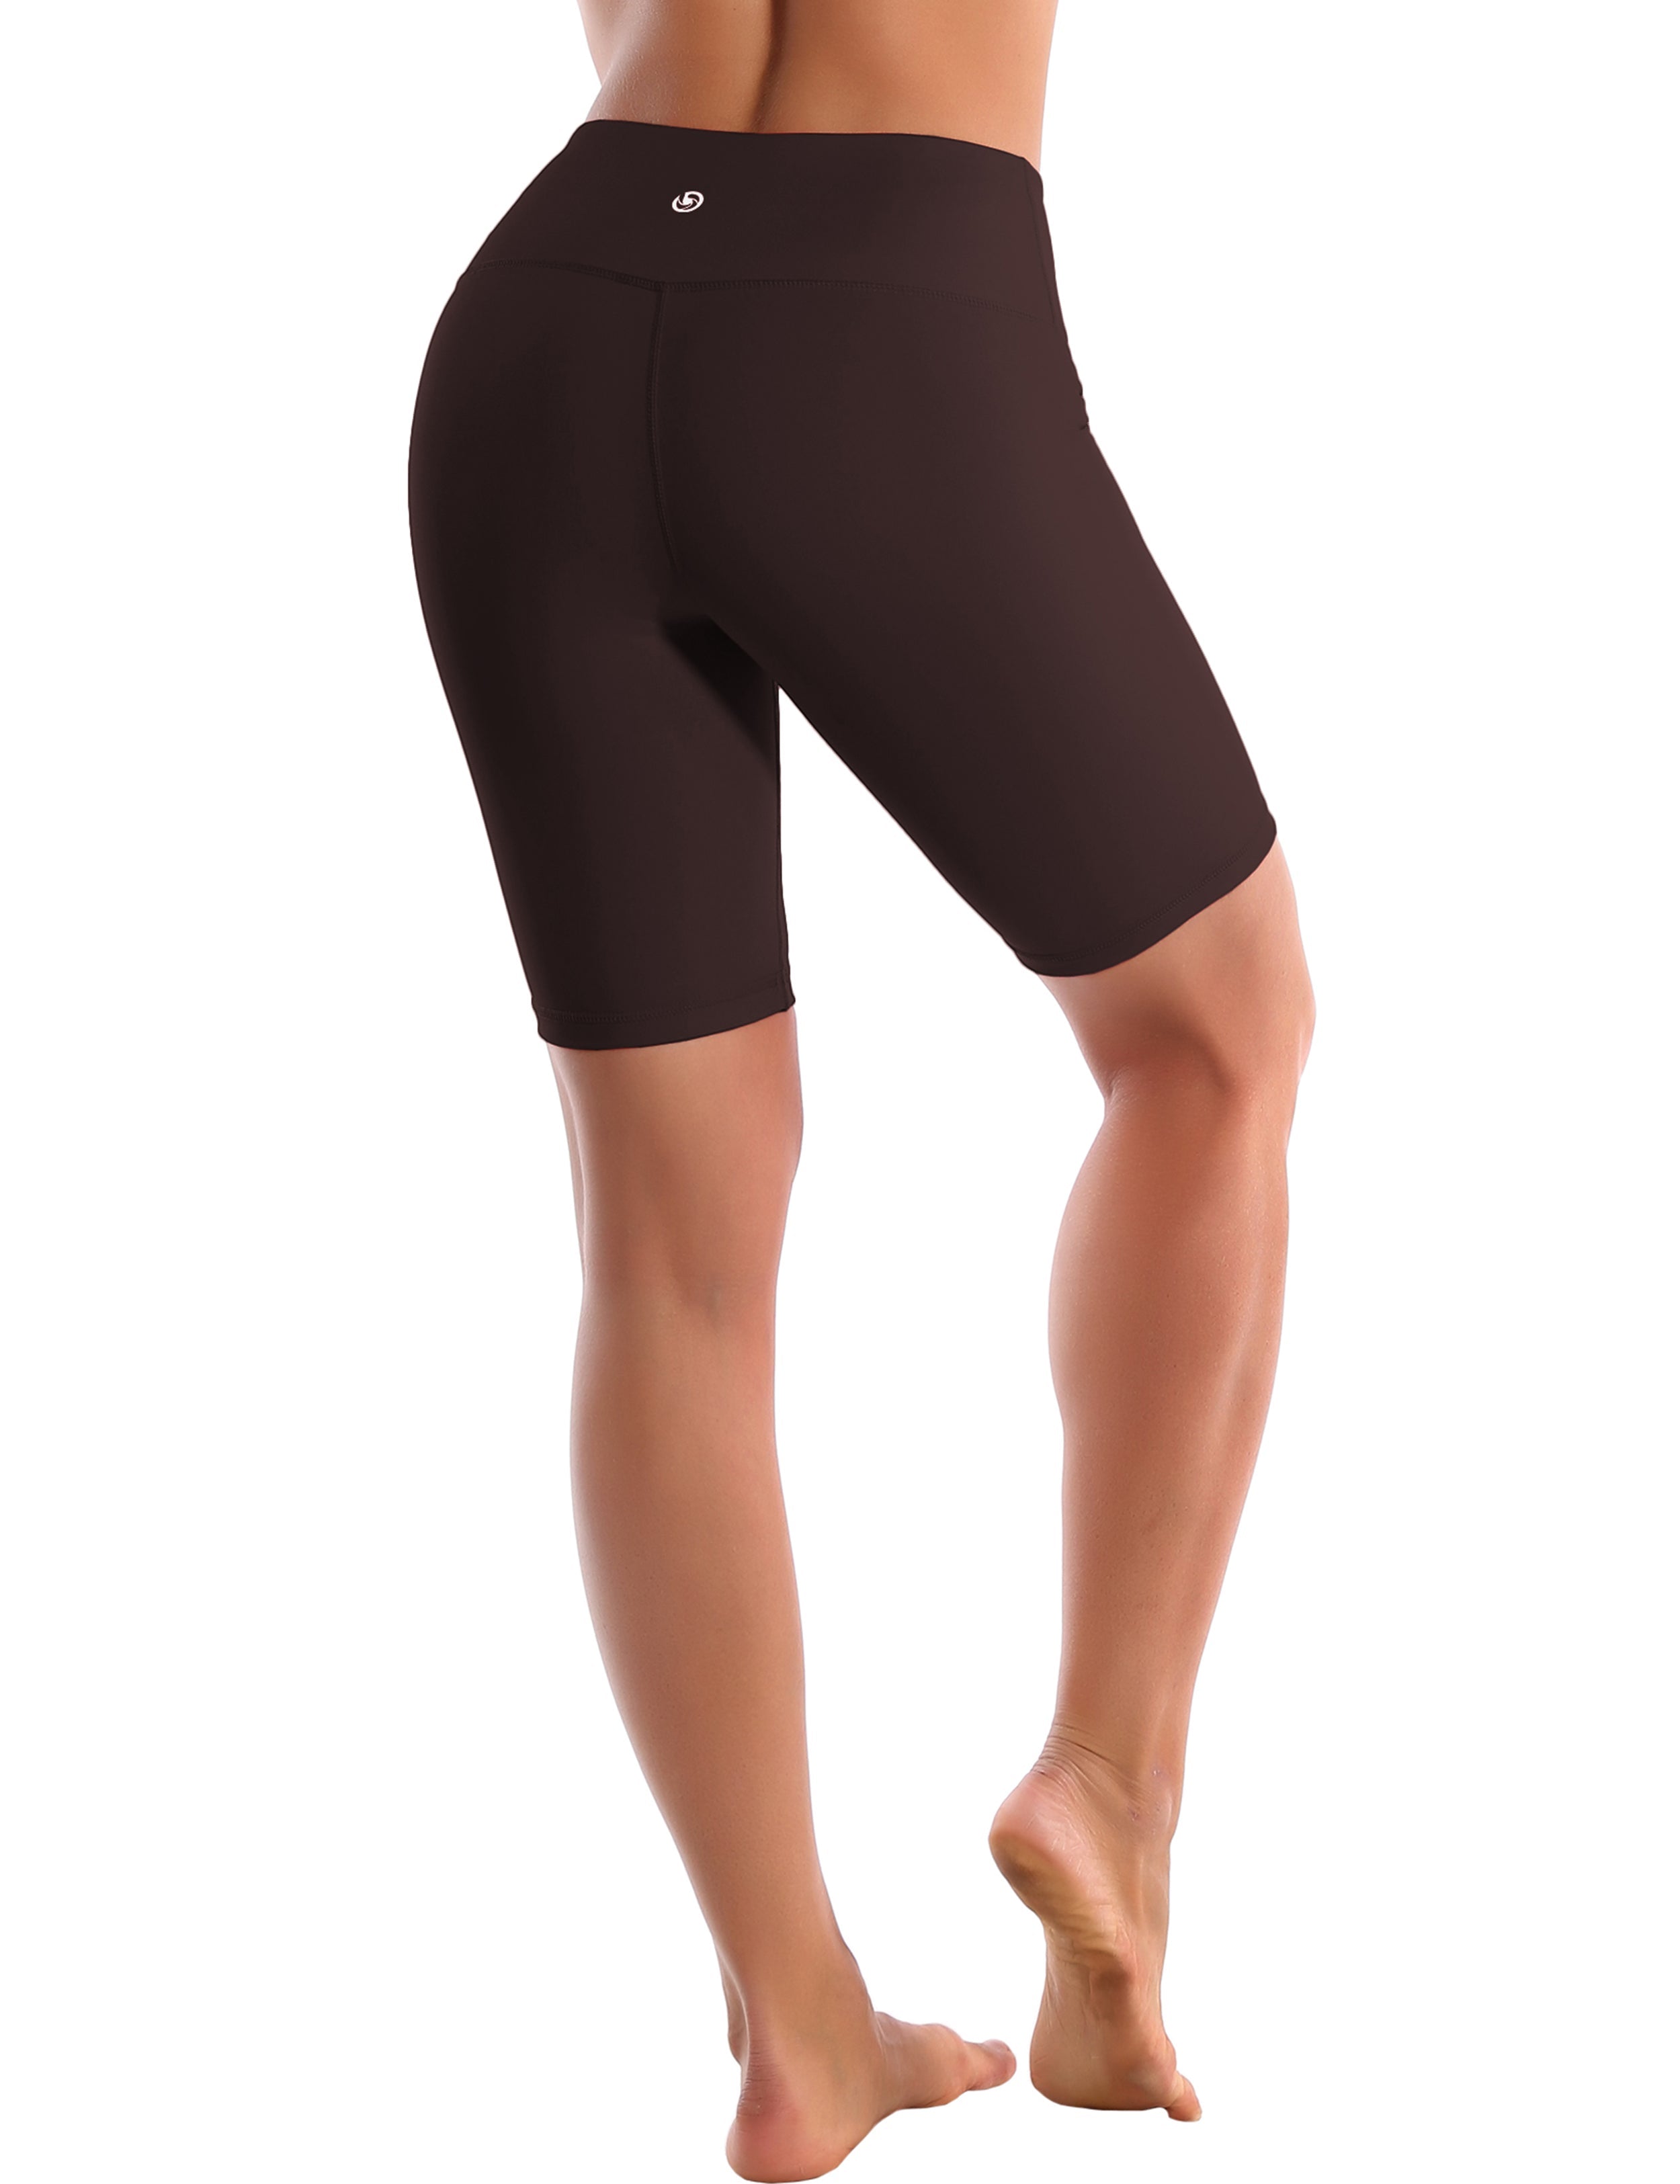 8" High Waist Golf Shorts mahoganymaroon Sleek, soft, smooth and totally comfortable: our newest style is here. Softest-ever fabric High elasticity High density 4-way stretch Fabric doesn't attract lint easily No see-through Moisture-wicking Machine wash 75% Nylon, 25% Spandex